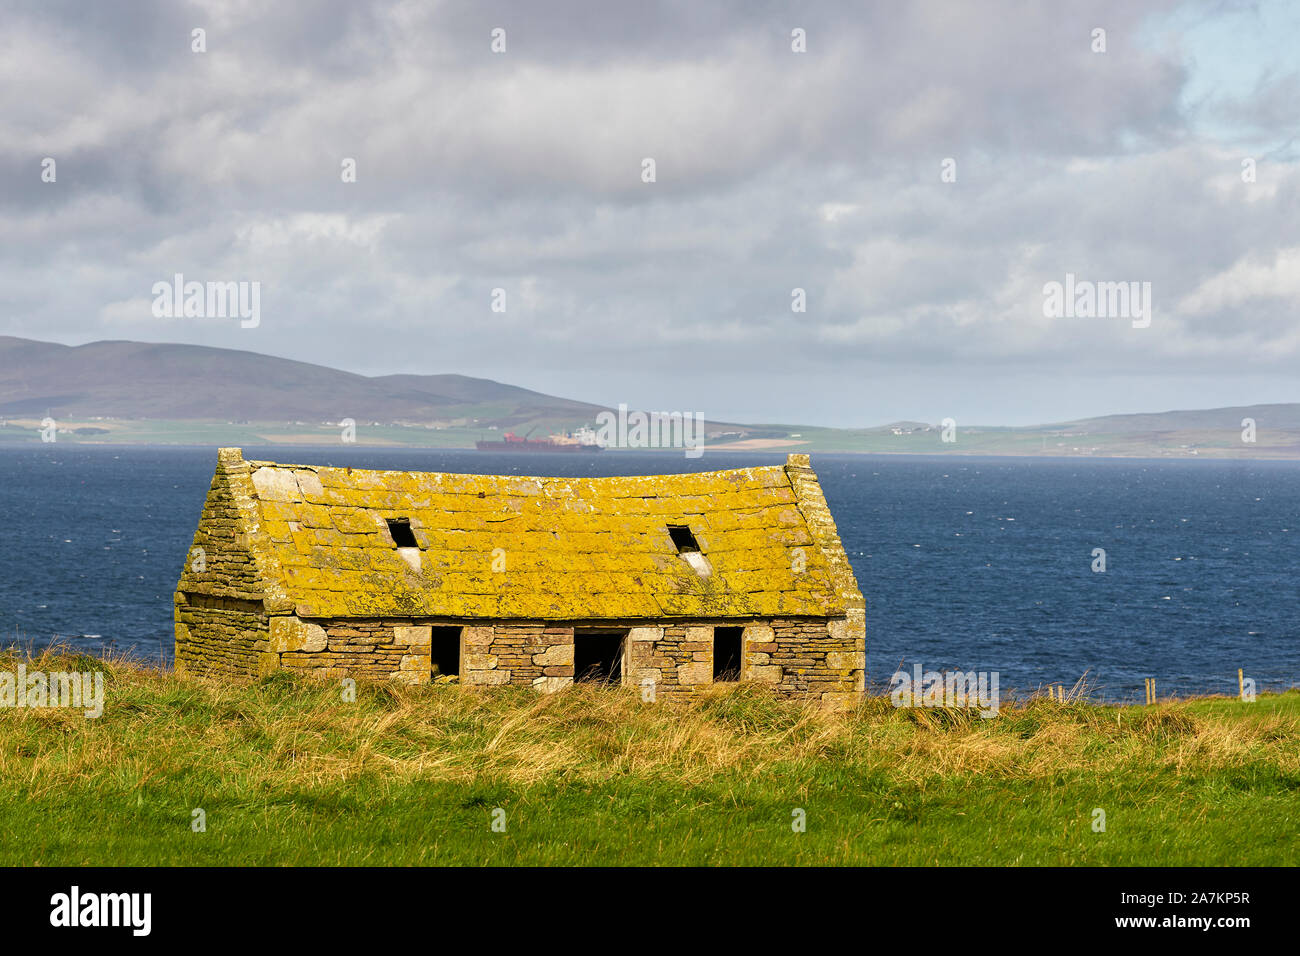 Ruined building covered in yellow lichen, Hoxa Head, South Ronaldsay, Orkney, Scotland Stock Photo